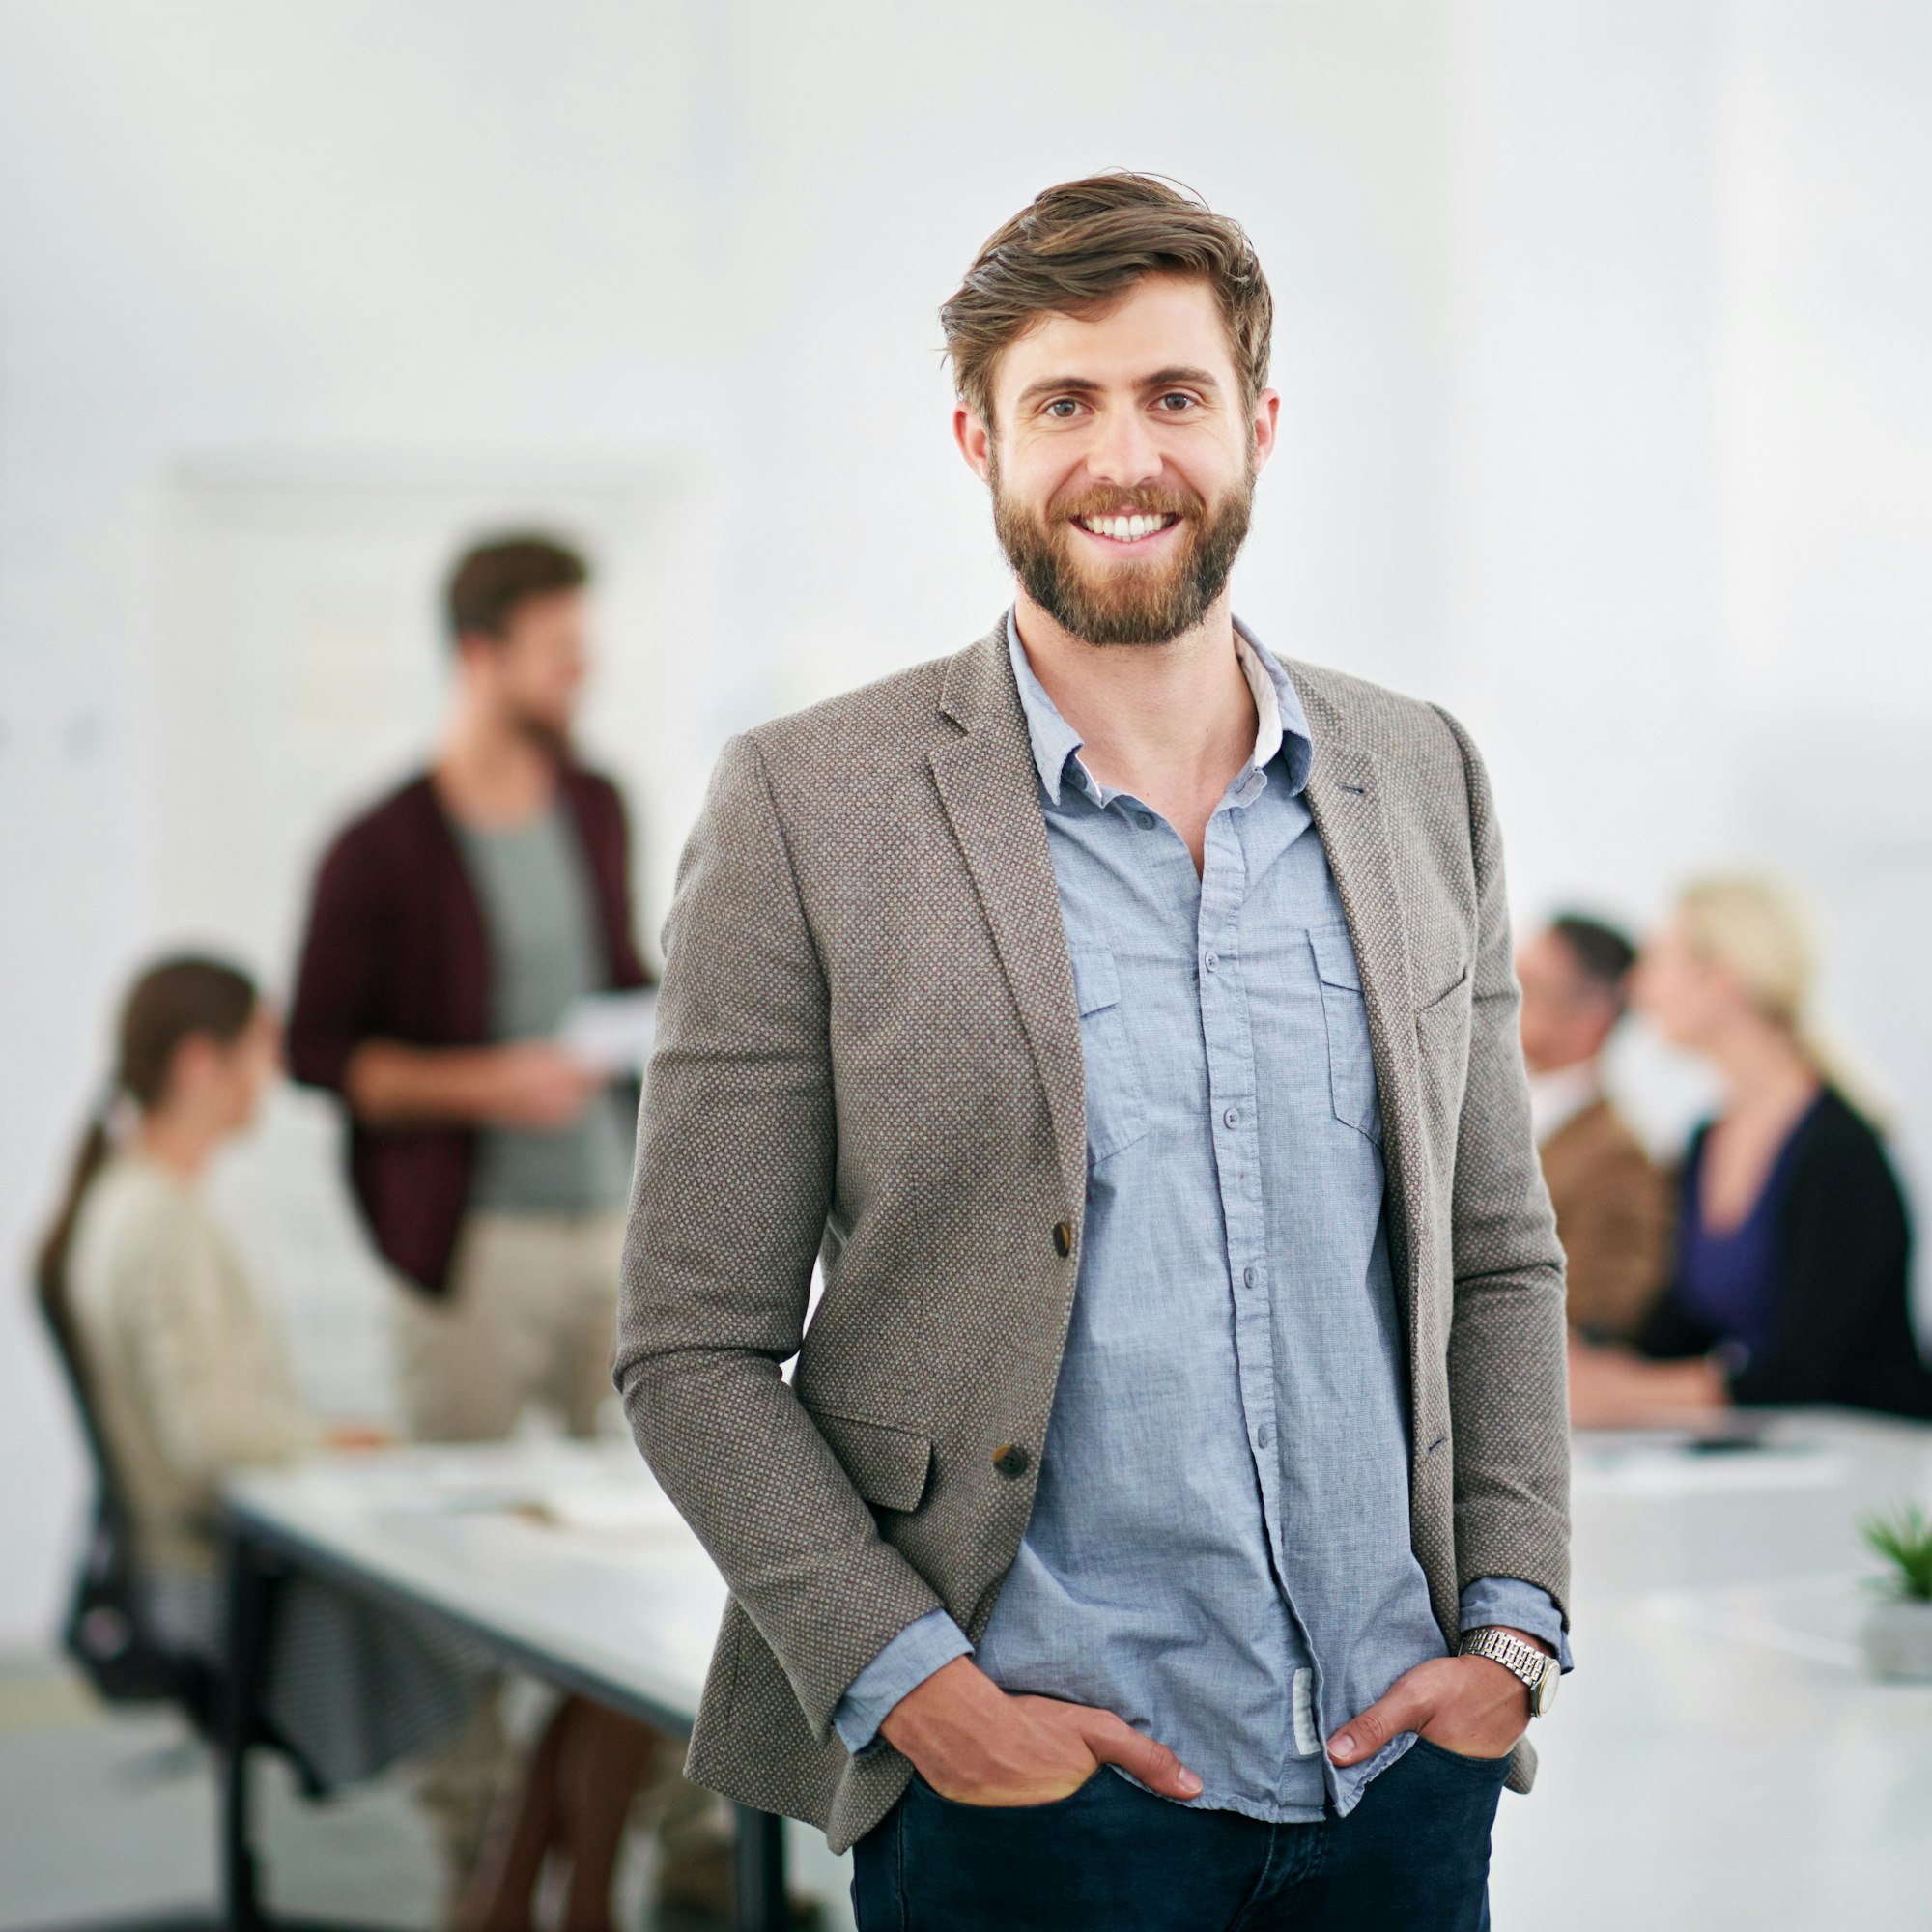 Portrait of a young businessman in an office with colleagues in the background